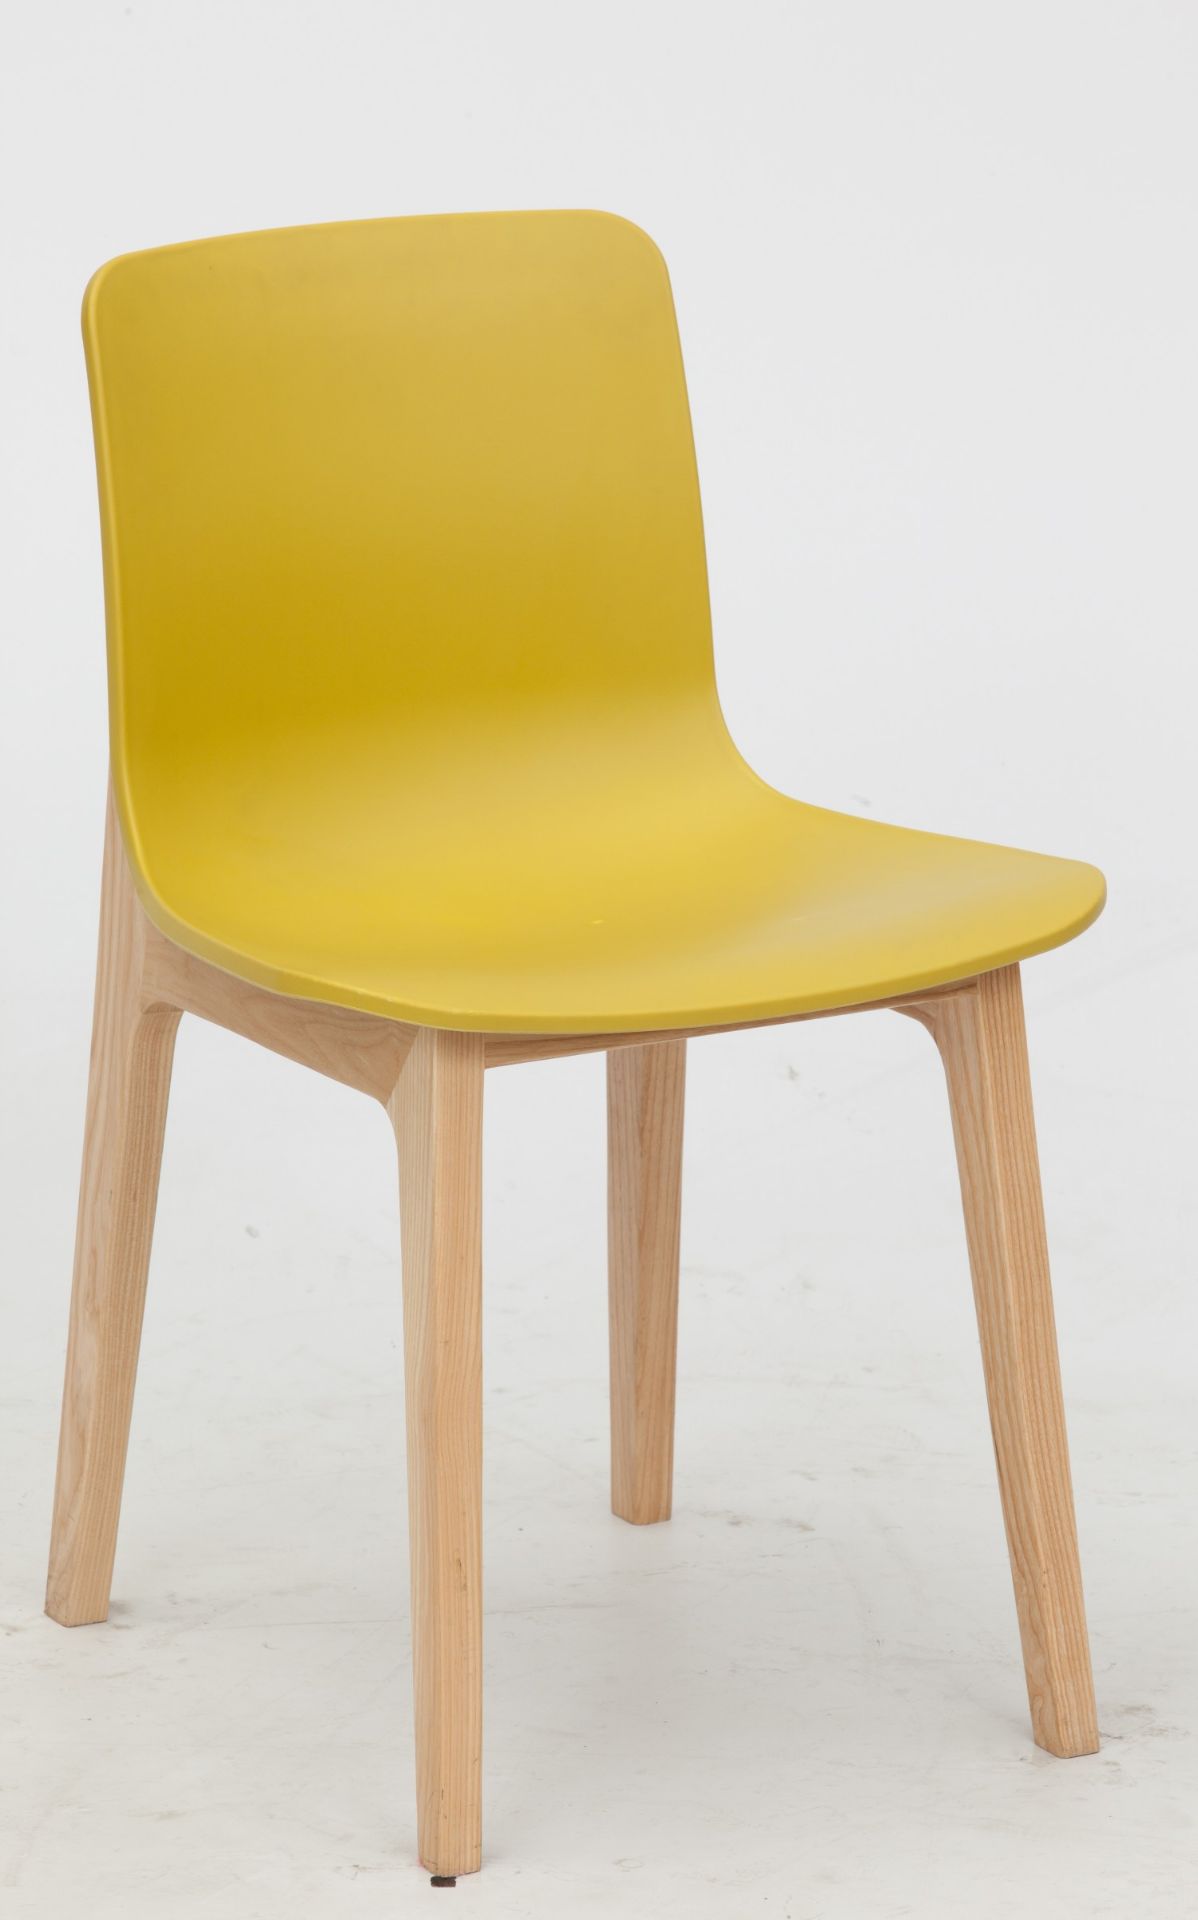 4 x Swift DC-782W Dining Chairs With Chartreuse ABS Seats and Natural Wood Bases - Approx RRP £360! - Image 6 of 6